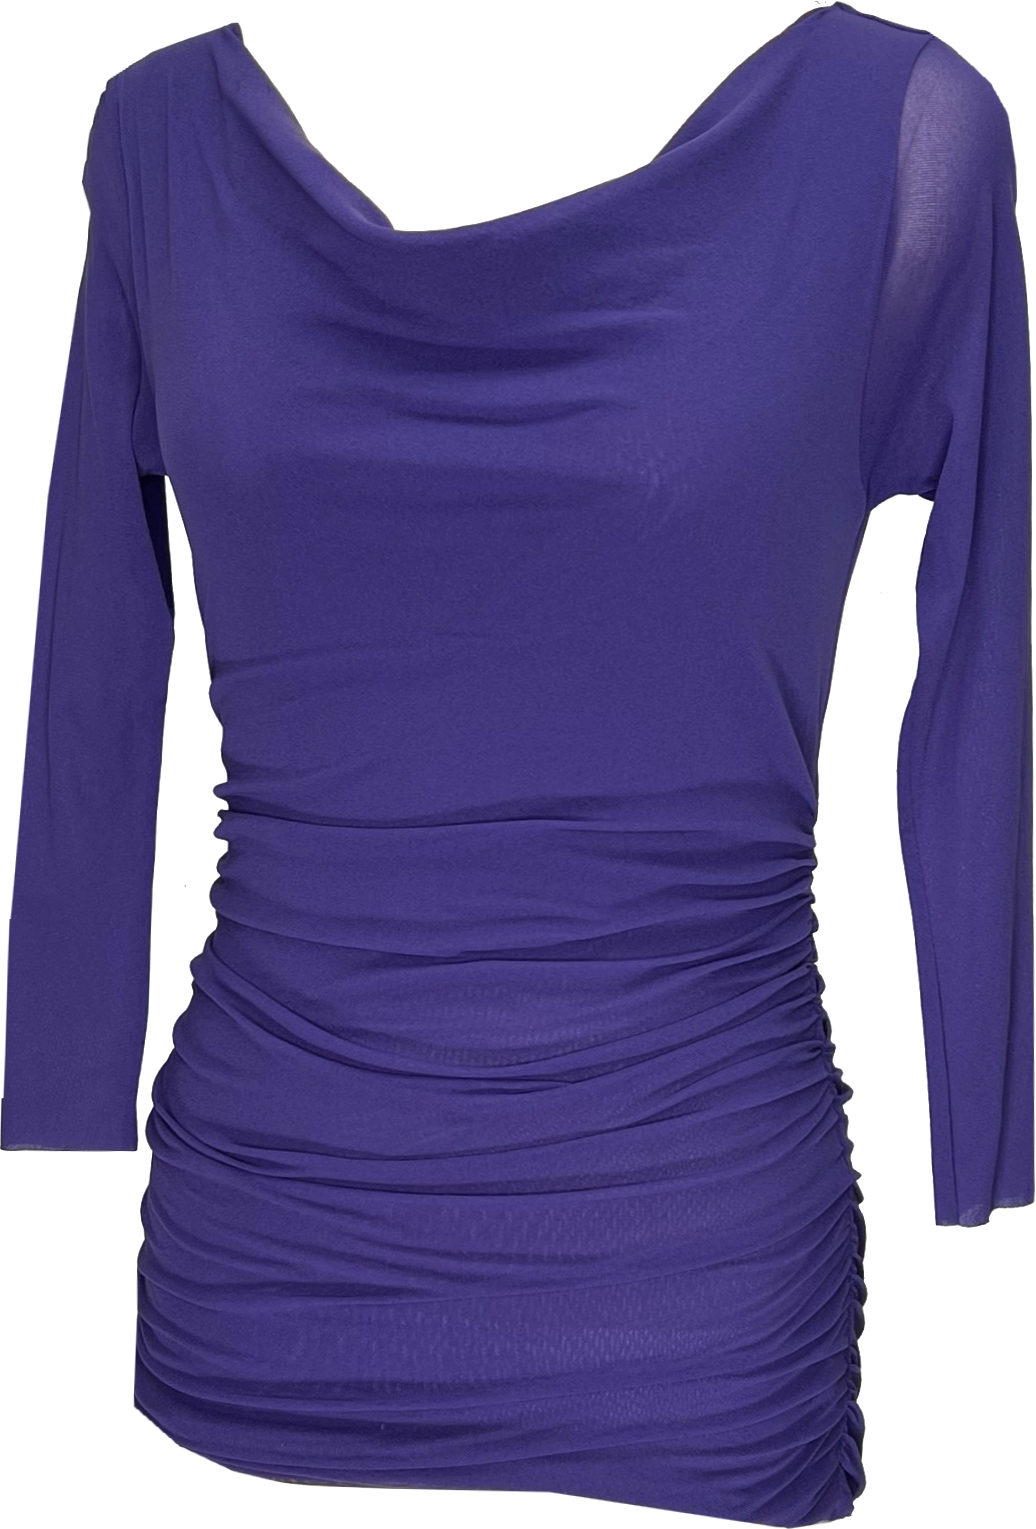 3/4 Sleeves Cowl Neck Top